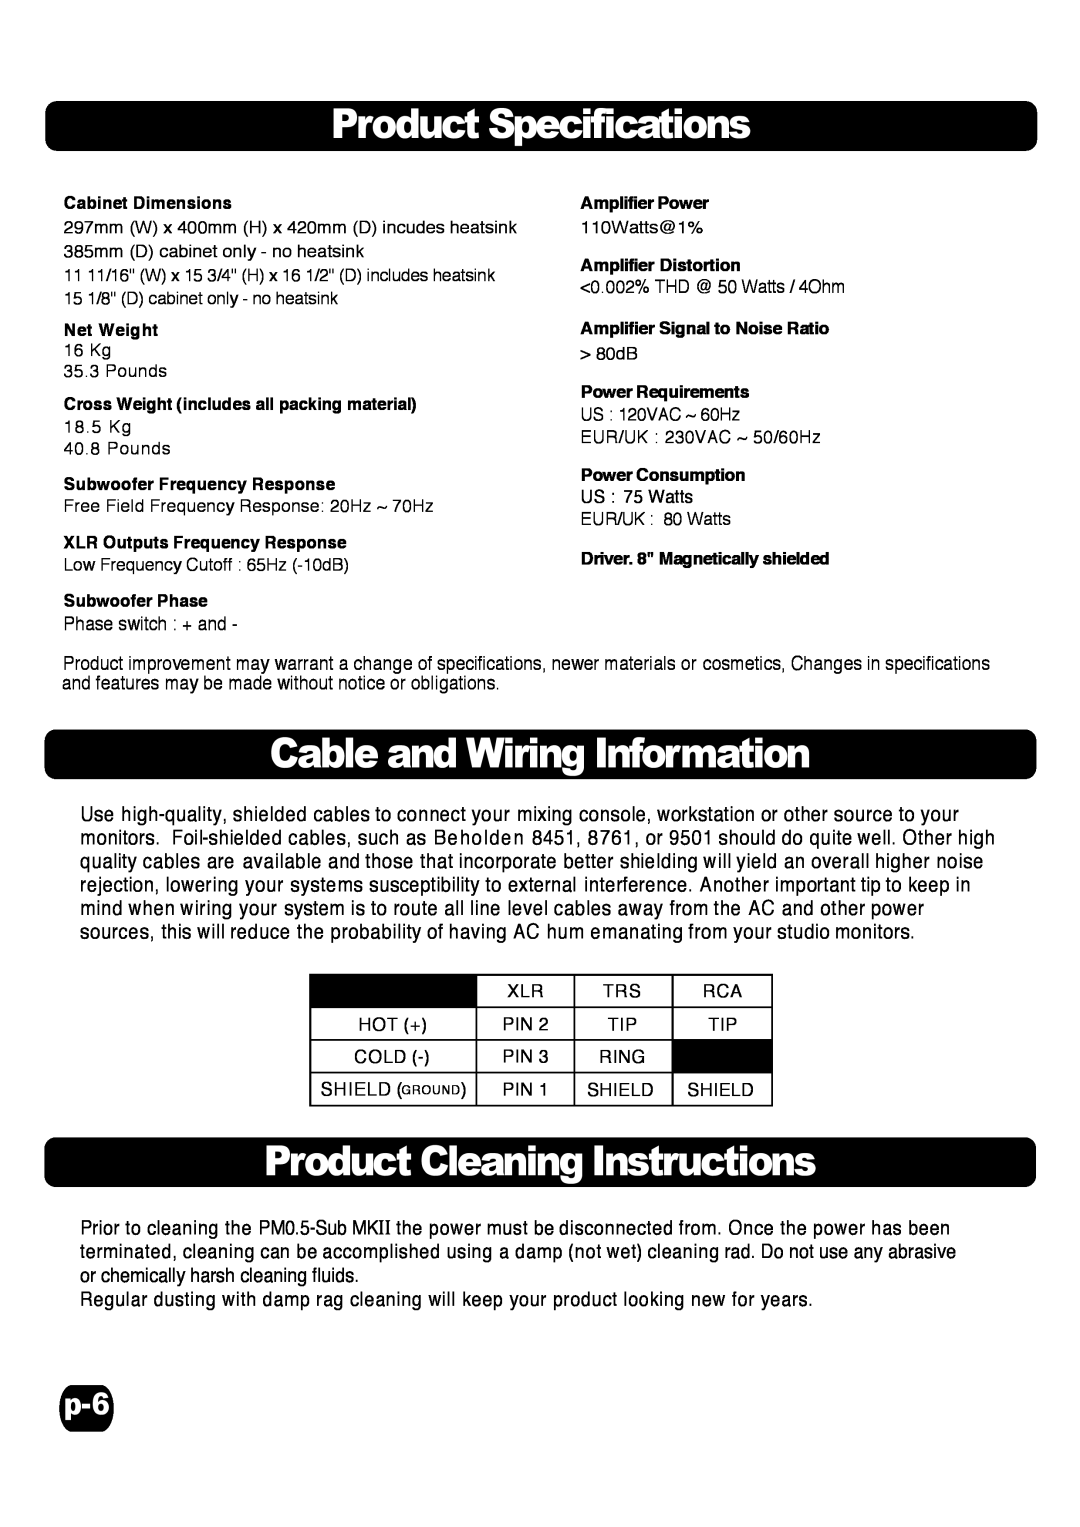 Fostex Speaker specifications Product Specifications, Cable and Wiring Information, Product Cleaning Instructions 